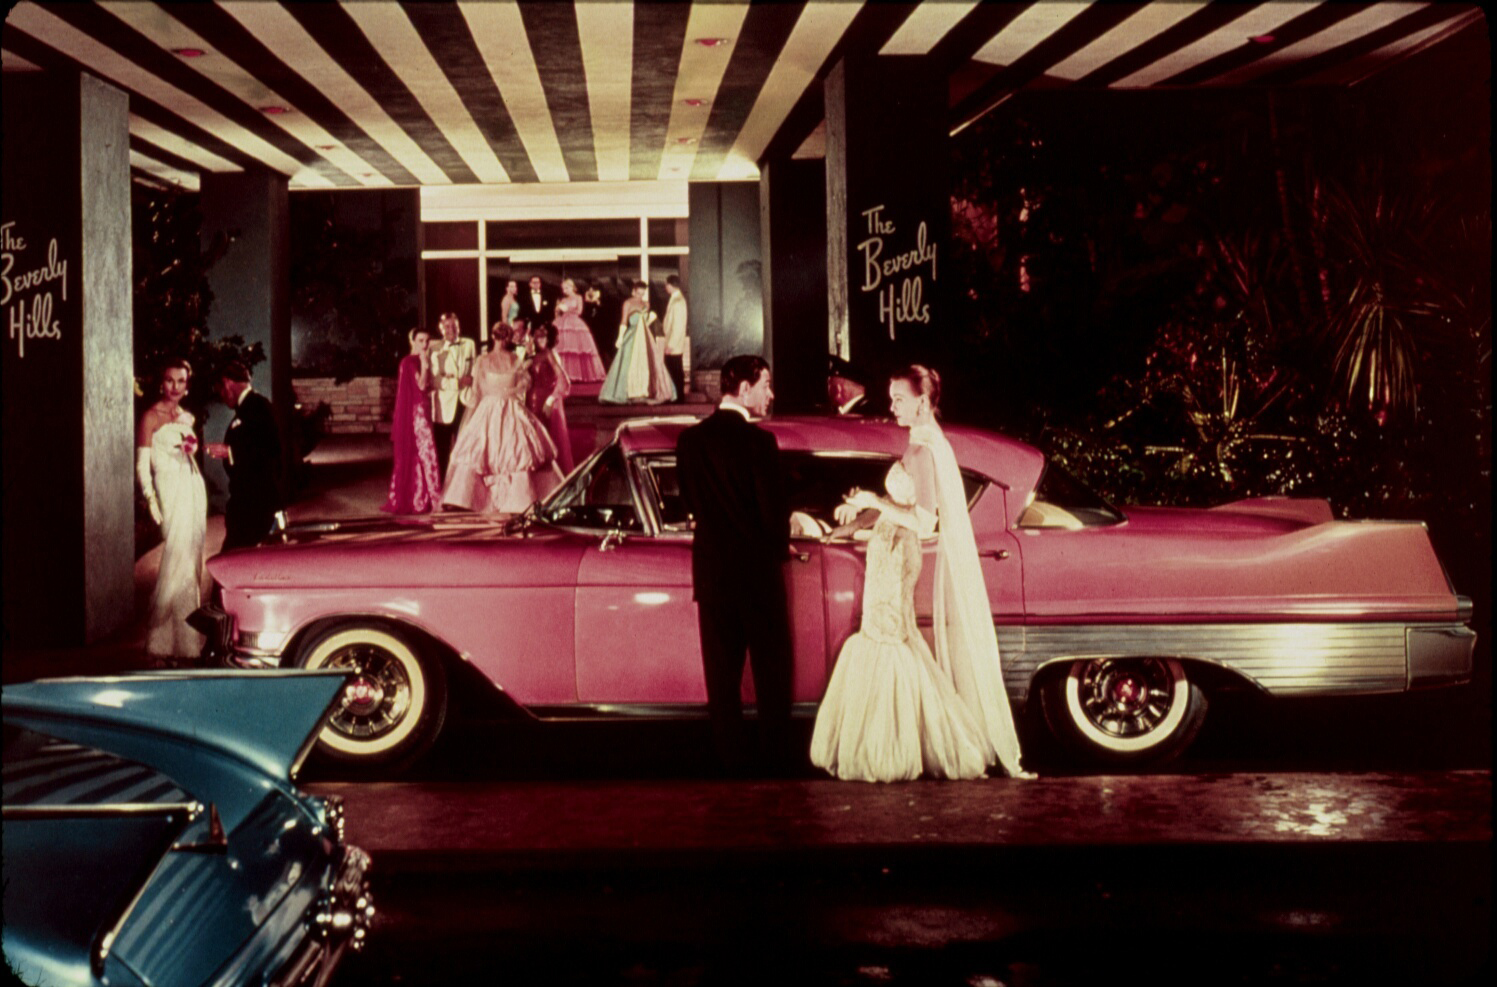 A glamorous 1957 Cadillac advertisement staged at the Beverly Hills Hotel